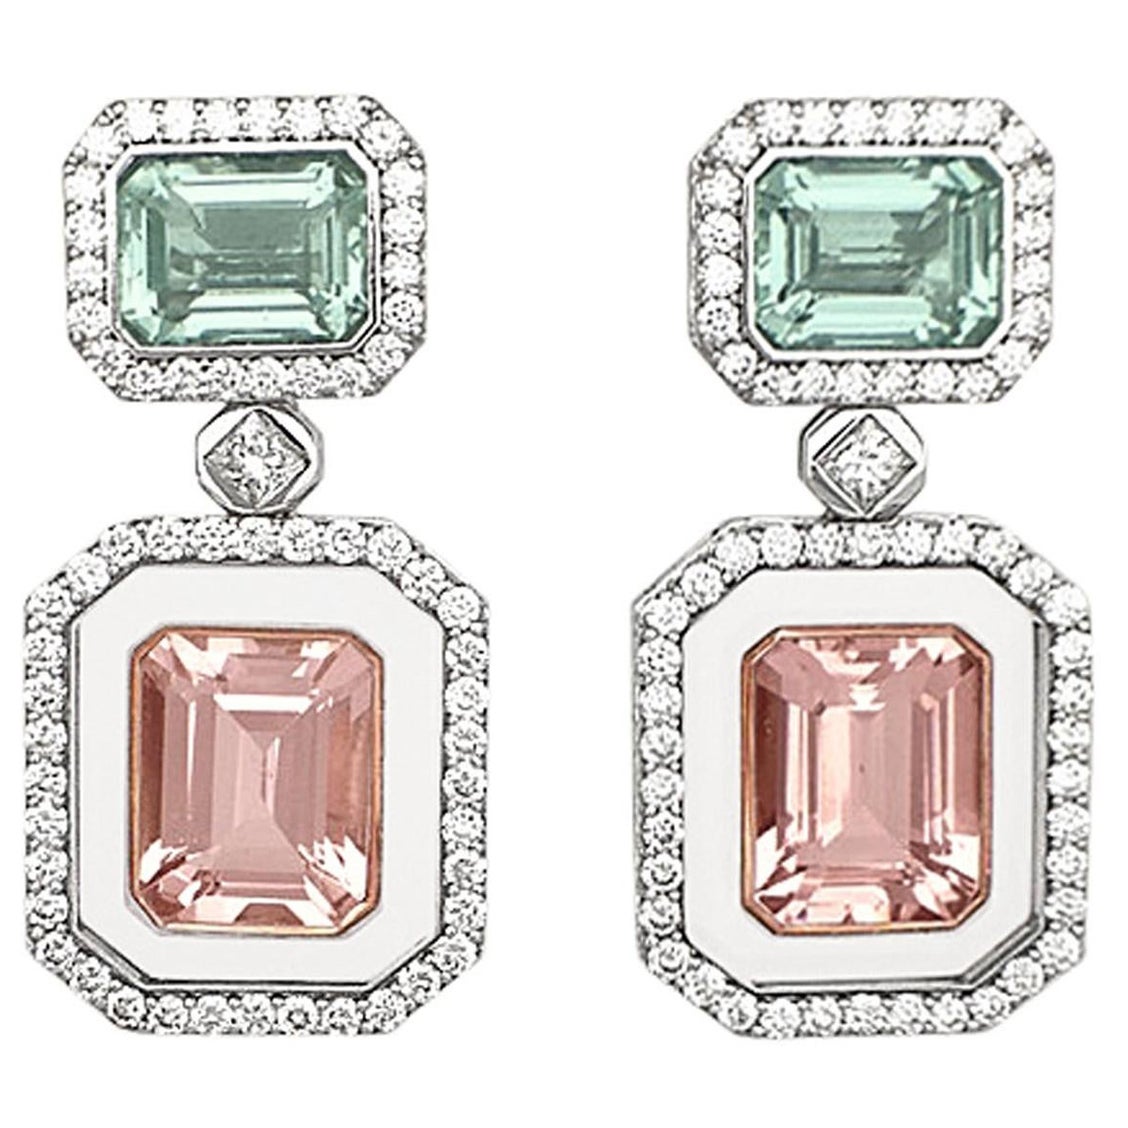 Morganite Green Beryl Diamond 18Kt Gold Rock Crystal Earrings and Jewelry Box For Sale